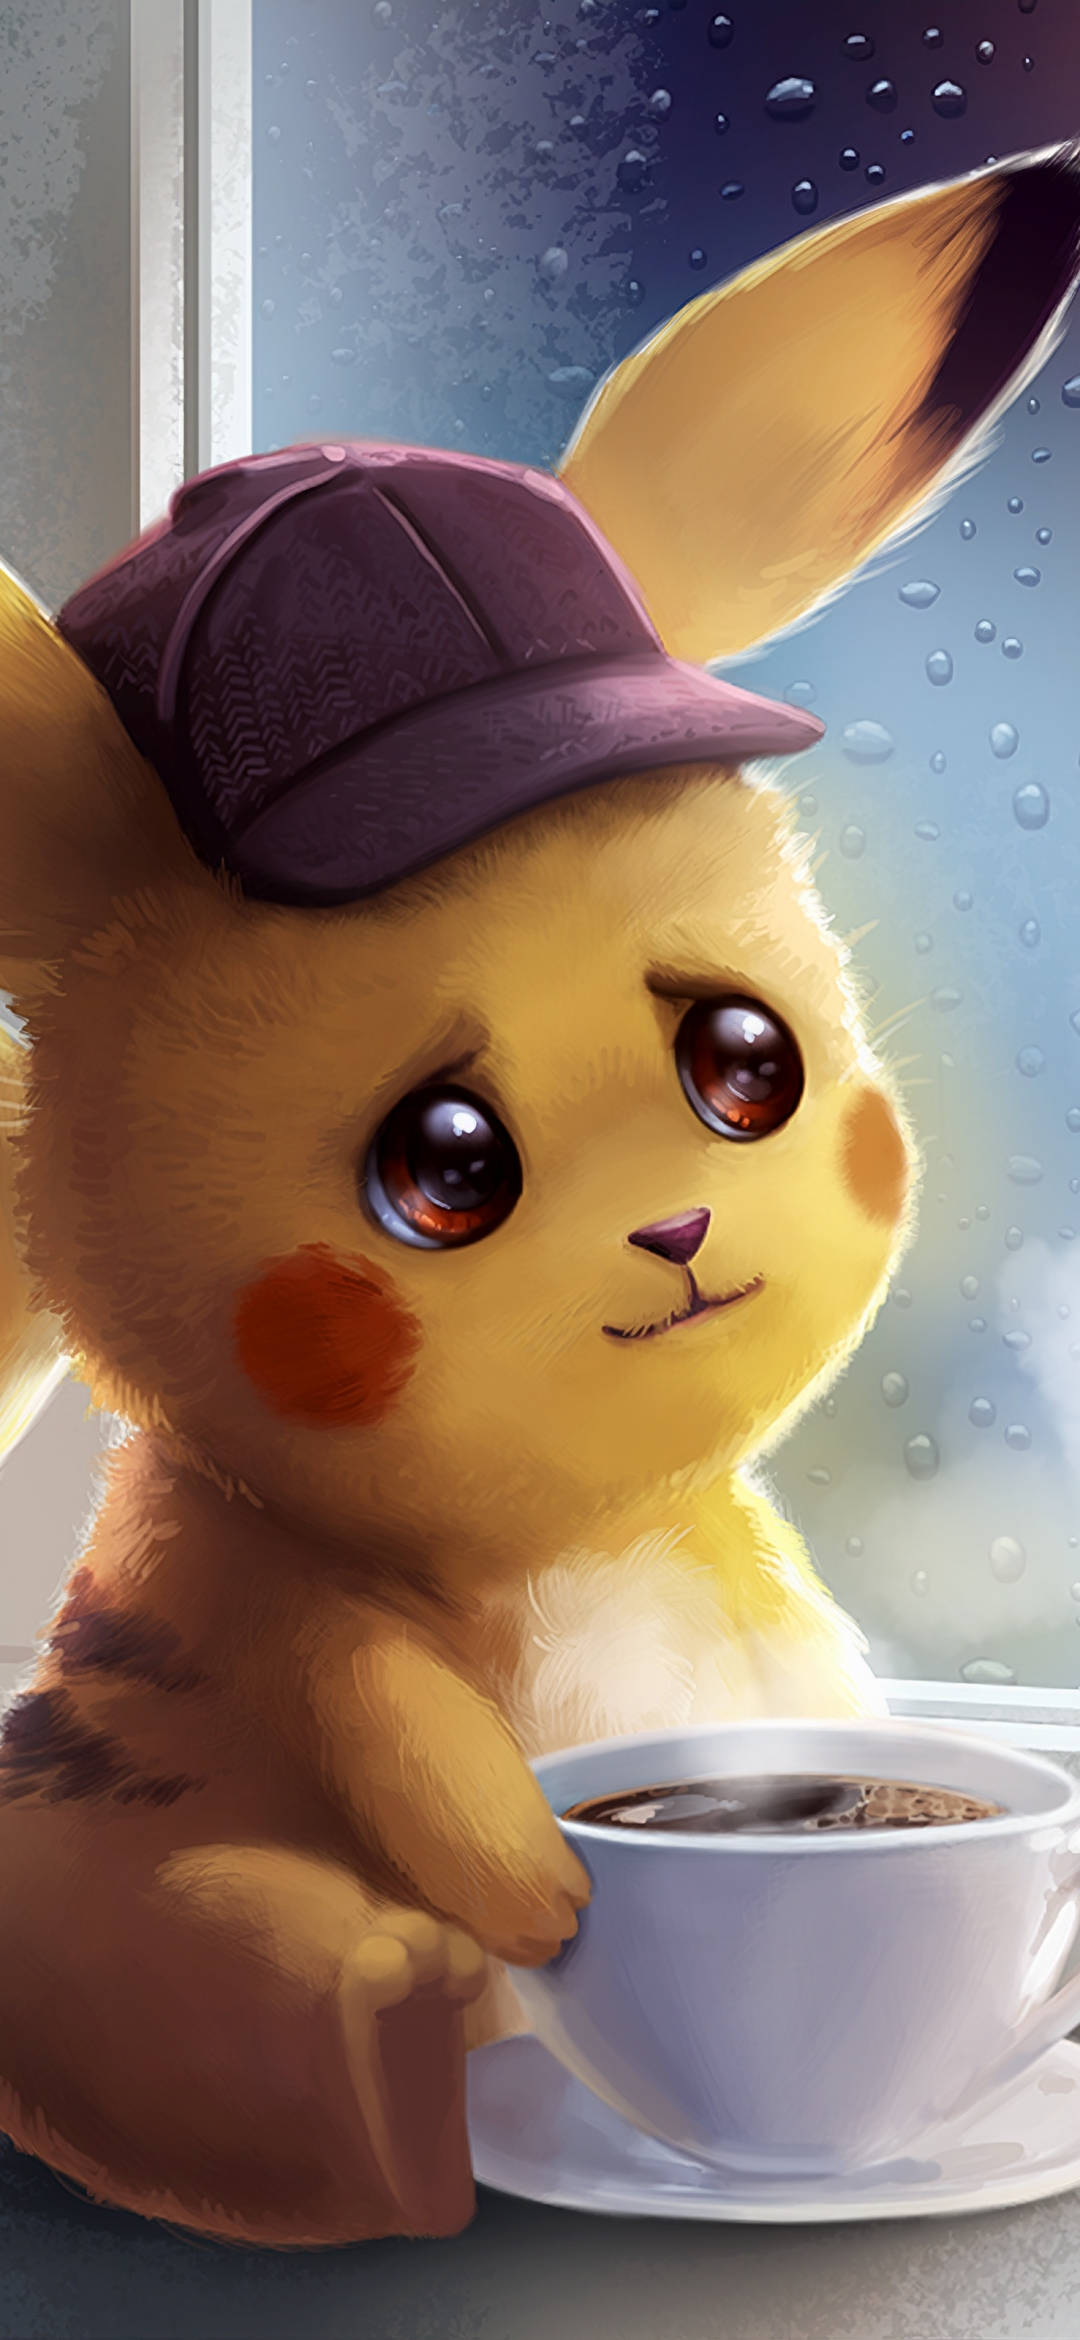 Pikachu With Cup Of Coffee Background